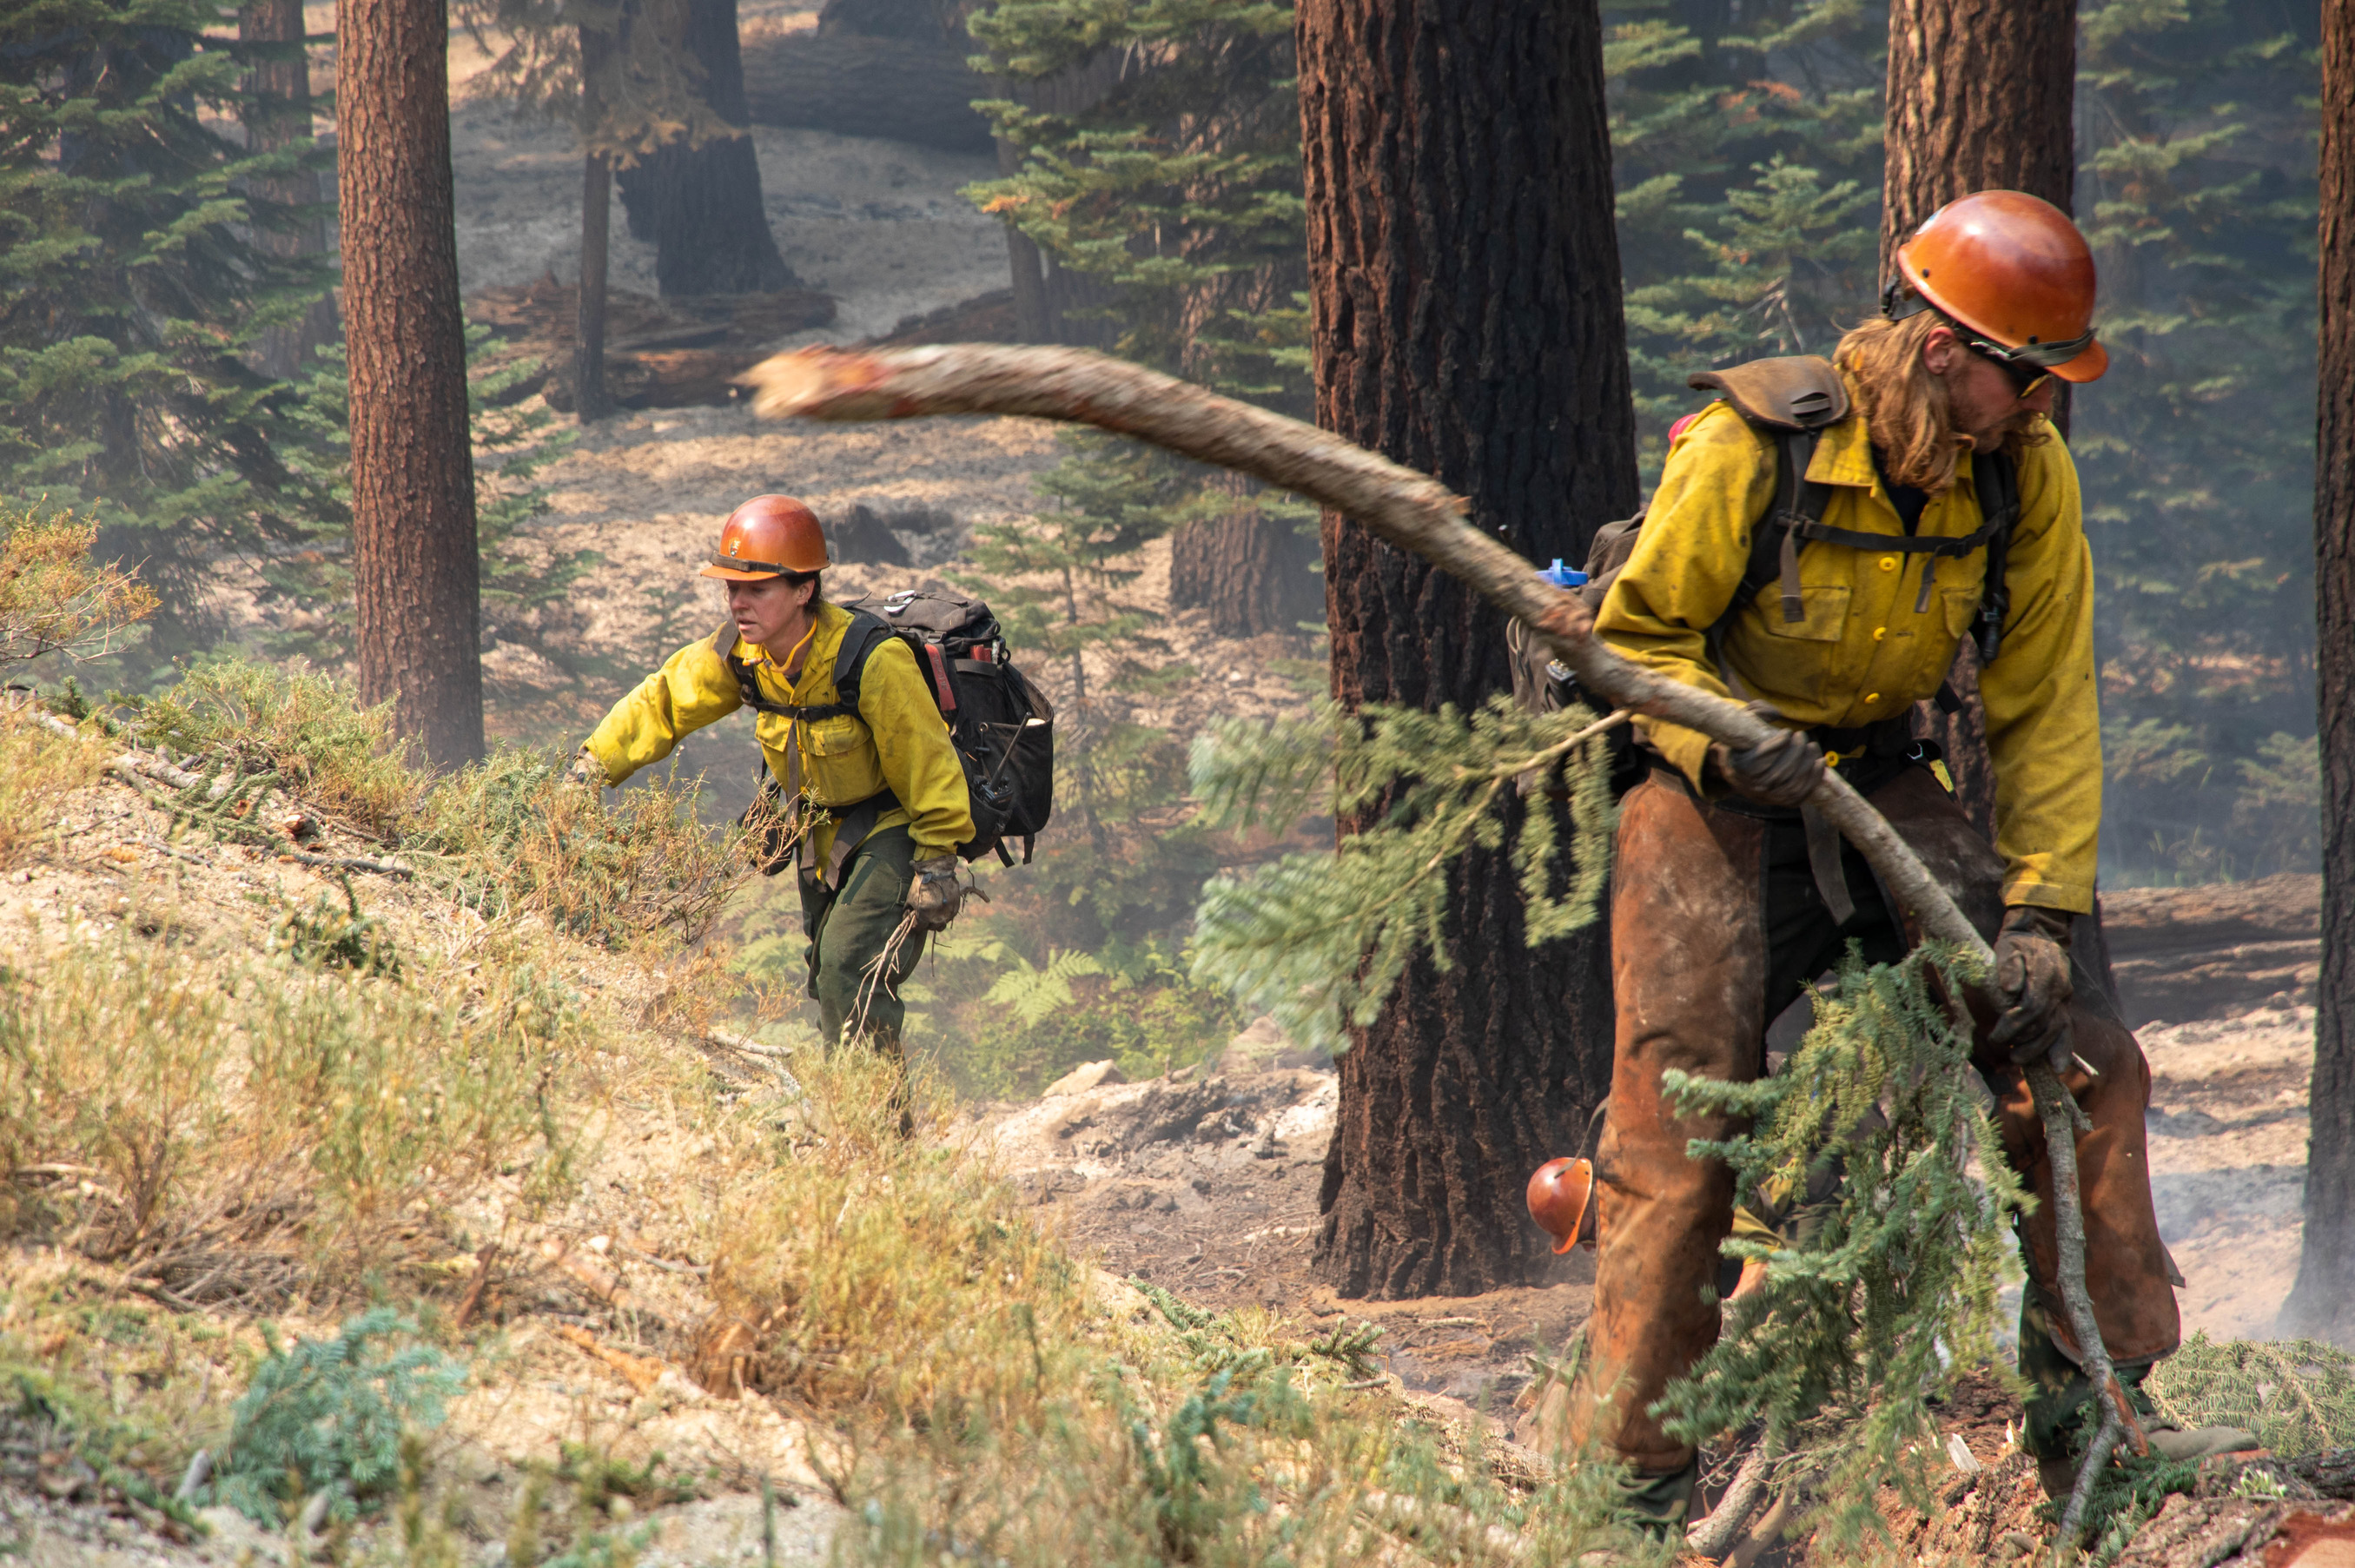 Wildland firefighters walk through wooded areas with smoke and fire around them